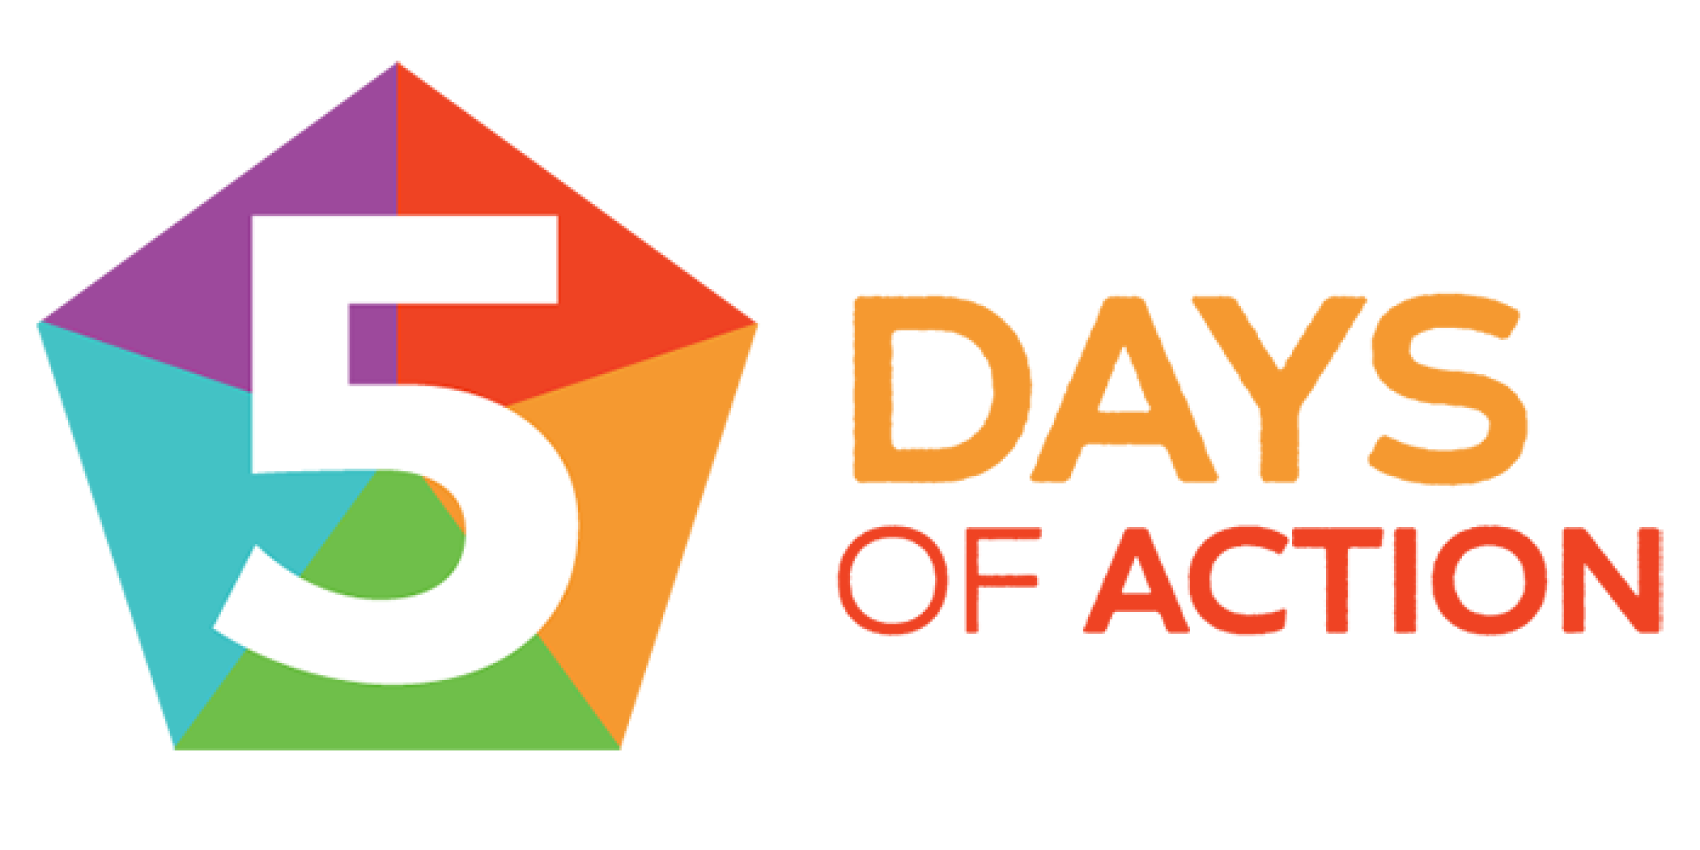 Five Days of Action logo